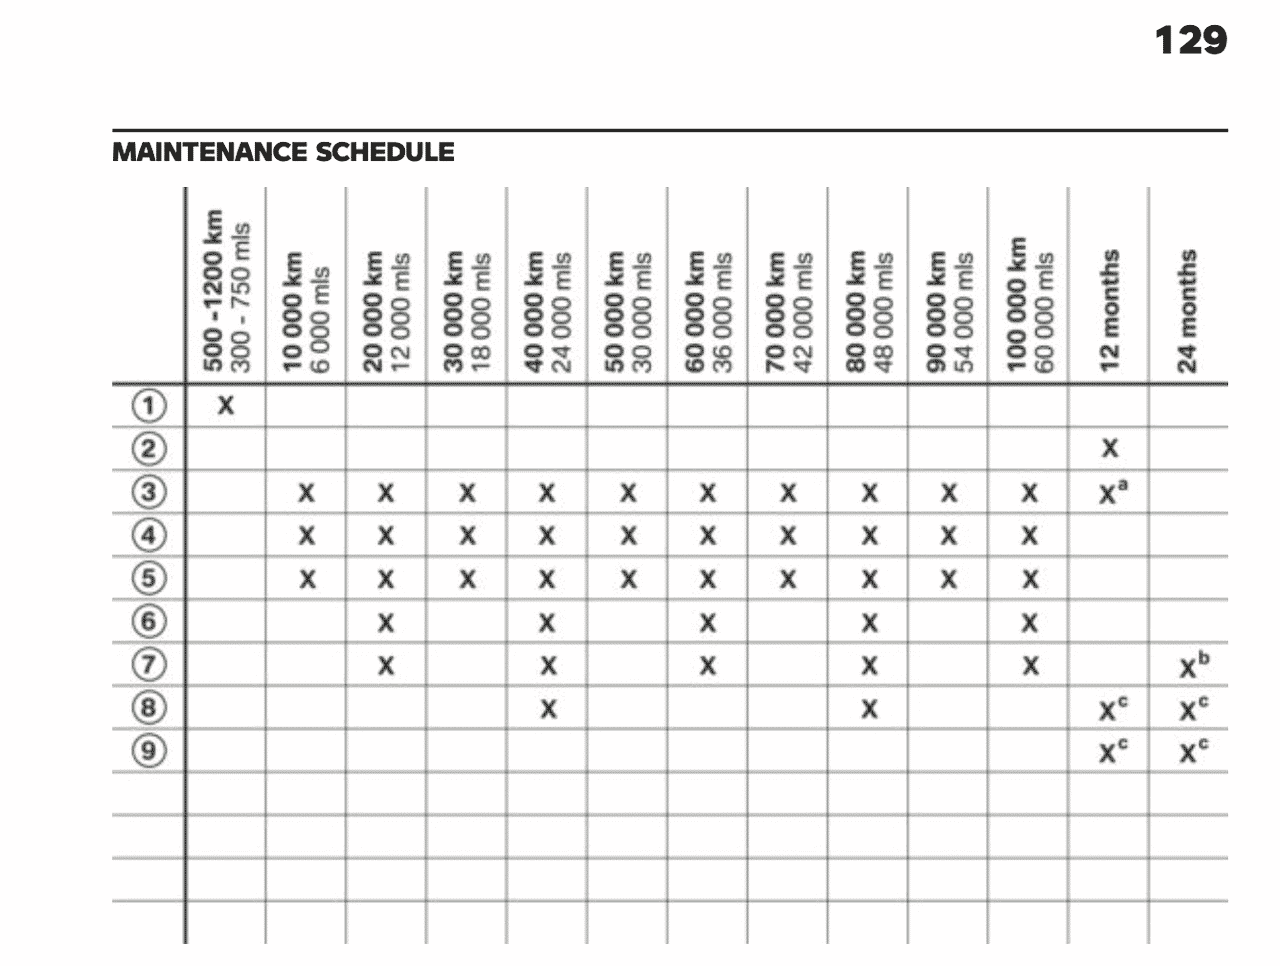 BMW R 18 maintenance schedule table from manual